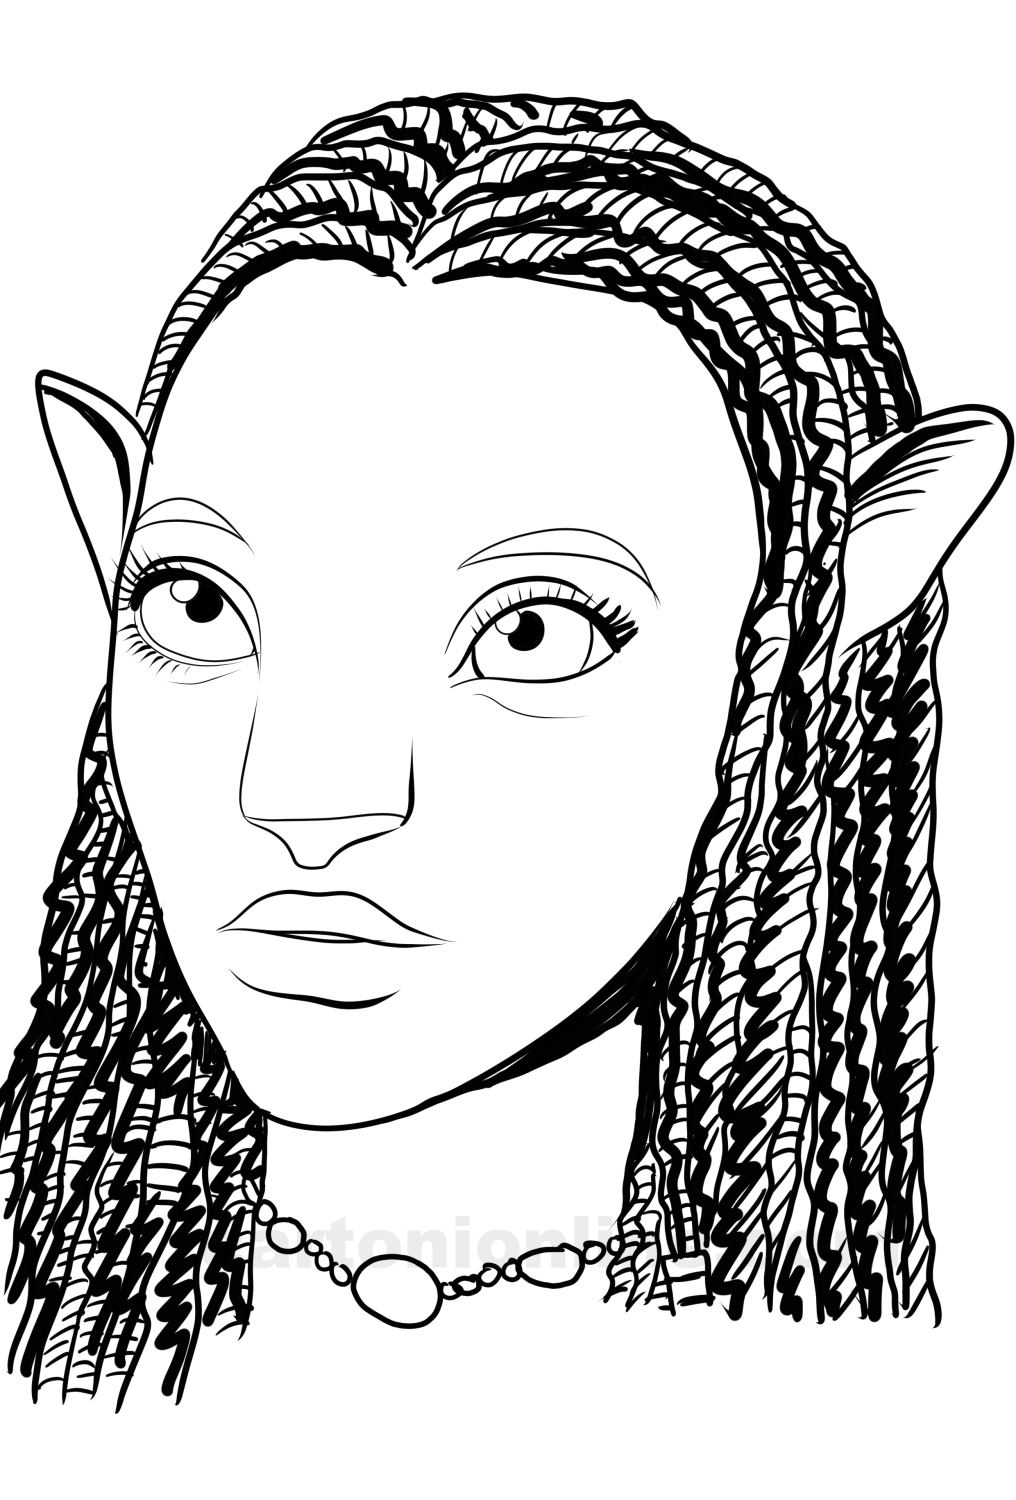 Neytiri - Avatar 2 Avatar: Istota wody coloring page to print and coloring